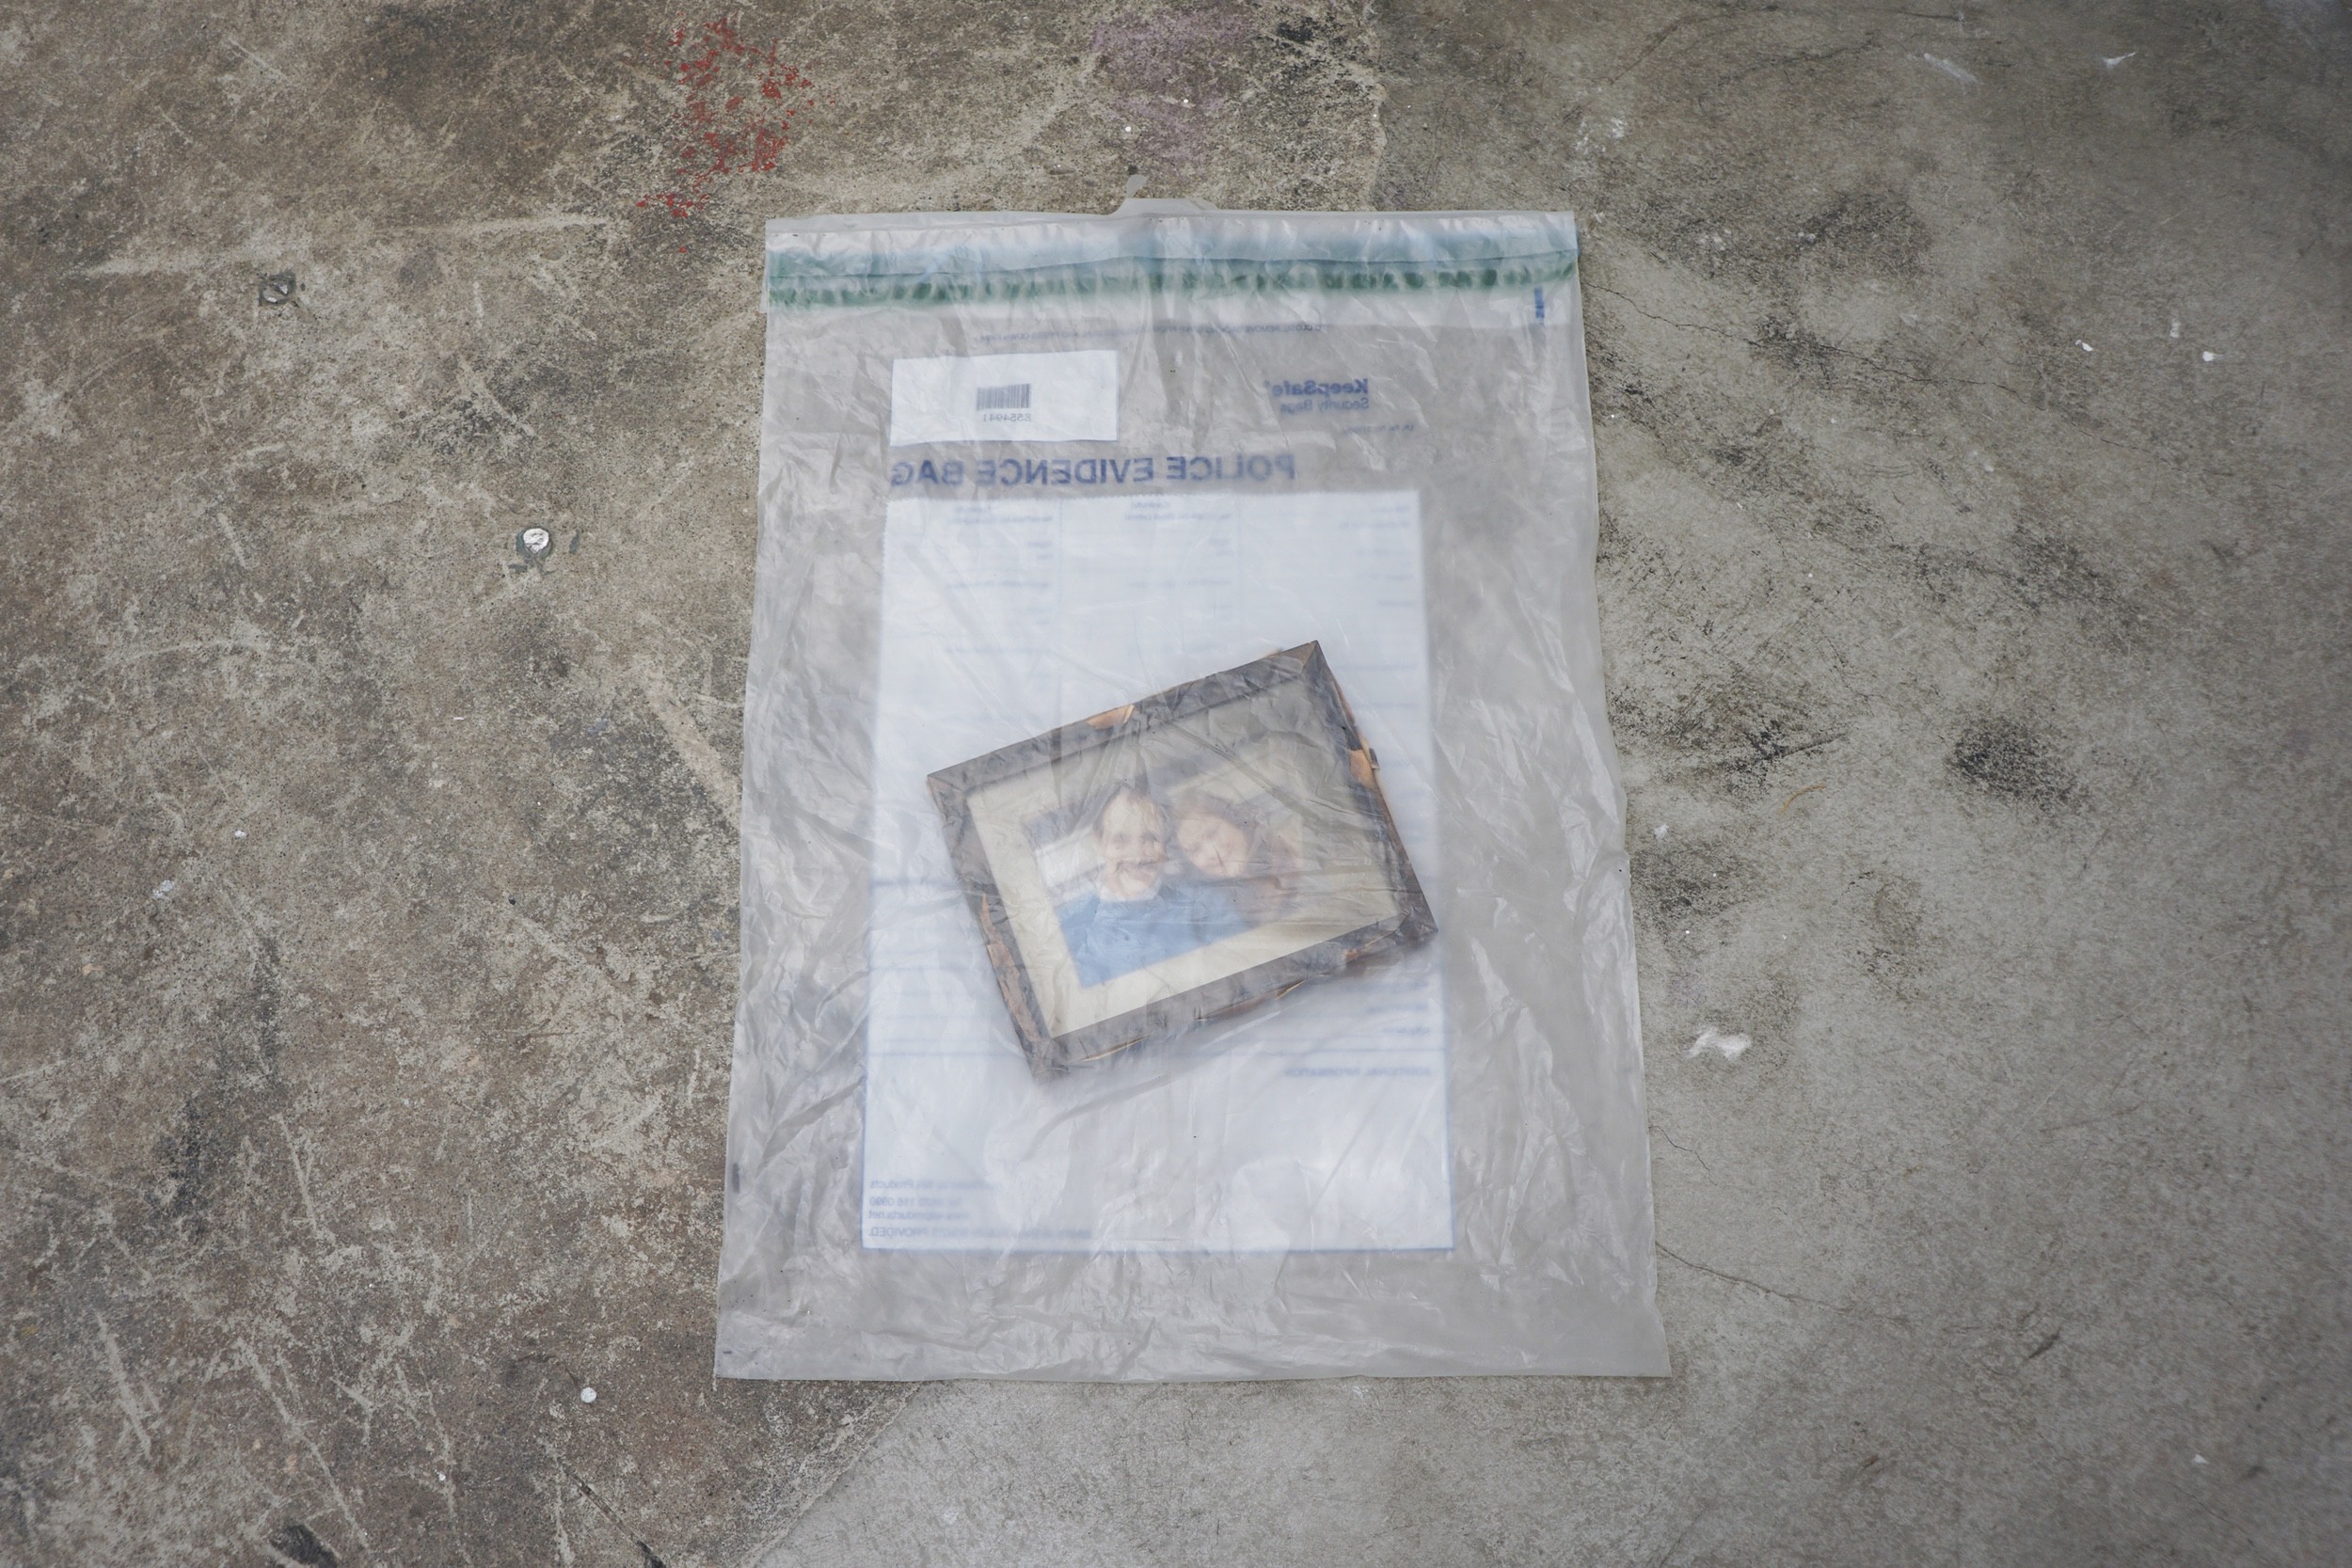  Anthony Discenza  Untitled (Burned Photograph) , 2017 Partially charred framed photo in plastic evidence bag used in production of 2011 film  Blitz  